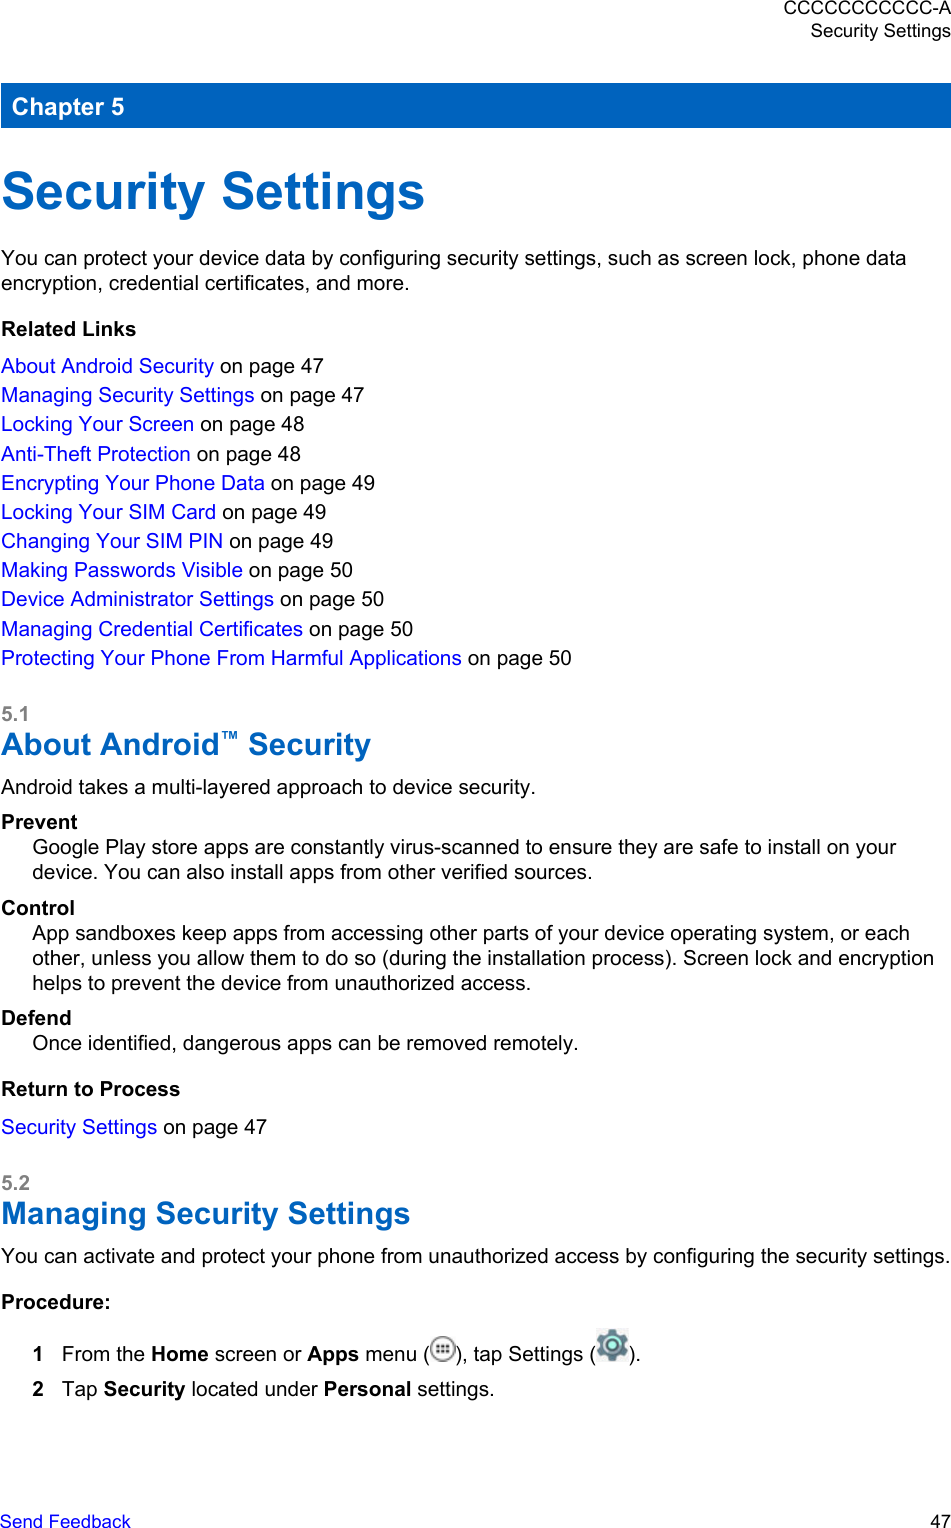 Chapter 5Security SettingsYou can protect your device data by configuring security settings, such as screen lock, phone dataencryption, credential certificates, and more.Related LinksAbout Android Security on page 47Managing Security Settings on page 47Locking Your Screen on page 48Anti-Theft Protection on page 48Encrypting Your Phone Data on page 49Locking Your SIM Card on page 49Changing Your SIM PIN on page 49Making Passwords Visible on page 50Device Administrator Settings on page 50Managing Credential Certificates on page 50Protecting Your Phone From Harmful Applications on page 505.1About Android™ SecurityAndroid takes a multi-layered approach to device security.PreventGoogle Play store apps are constantly virus-scanned to ensure they are safe to install on yourdevice. You can also install apps from other verified sources.ControlApp sandboxes keep apps from accessing other parts of your device operating system, or eachother, unless you allow them to do so (during the installation process). Screen lock and encryptionhelps to prevent the device from unauthorized access.DefendOnce identified, dangerous apps can be removed remotely.Return to ProcessSecurity Settings on page 475.2Managing Security SettingsYou can activate and protect your phone from unauthorized access by configuring the security settings.Procedure:1From the Home screen or Apps menu ( ), tap Settings ( ).2Tap Security located under Personal settings.CCCCCCCCCCC-ASecurity SettingsSend Feedback   47